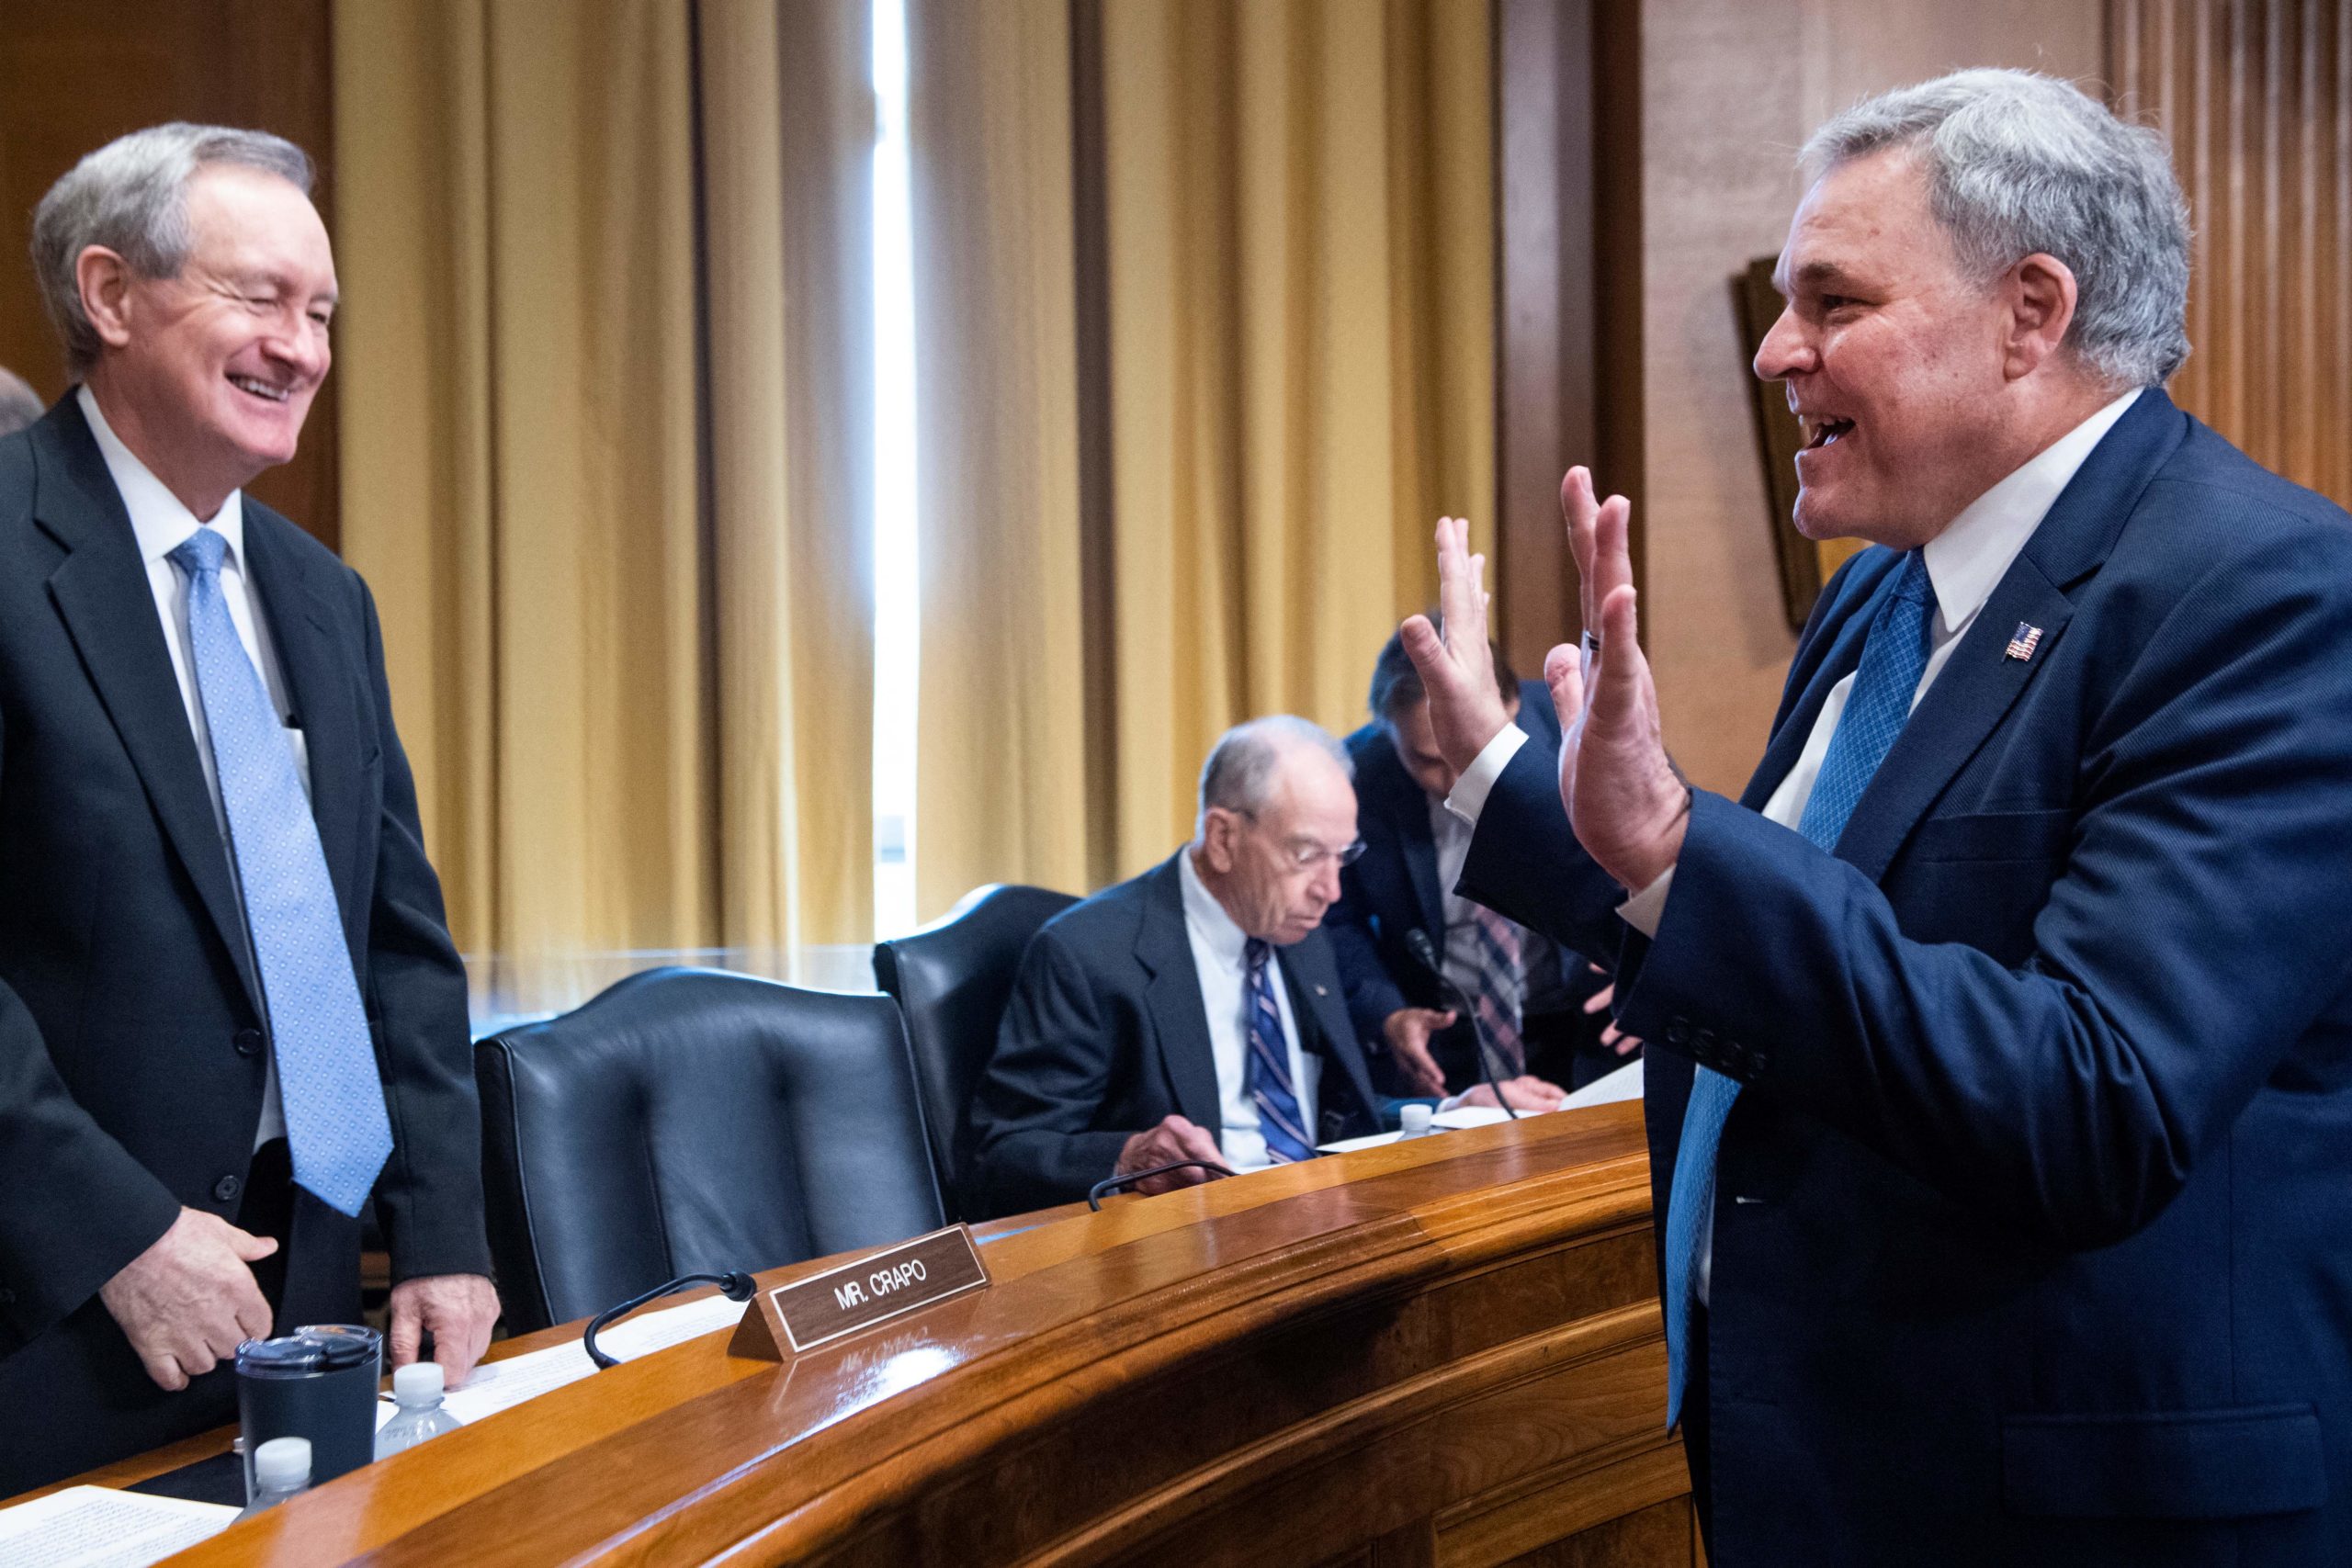 IRS Commissioner Charles Rettig greets Ranking Member Sen. Mike Crapo before a June 8 hearing. (Tom Williams/Pool/AFP via Getty Images)